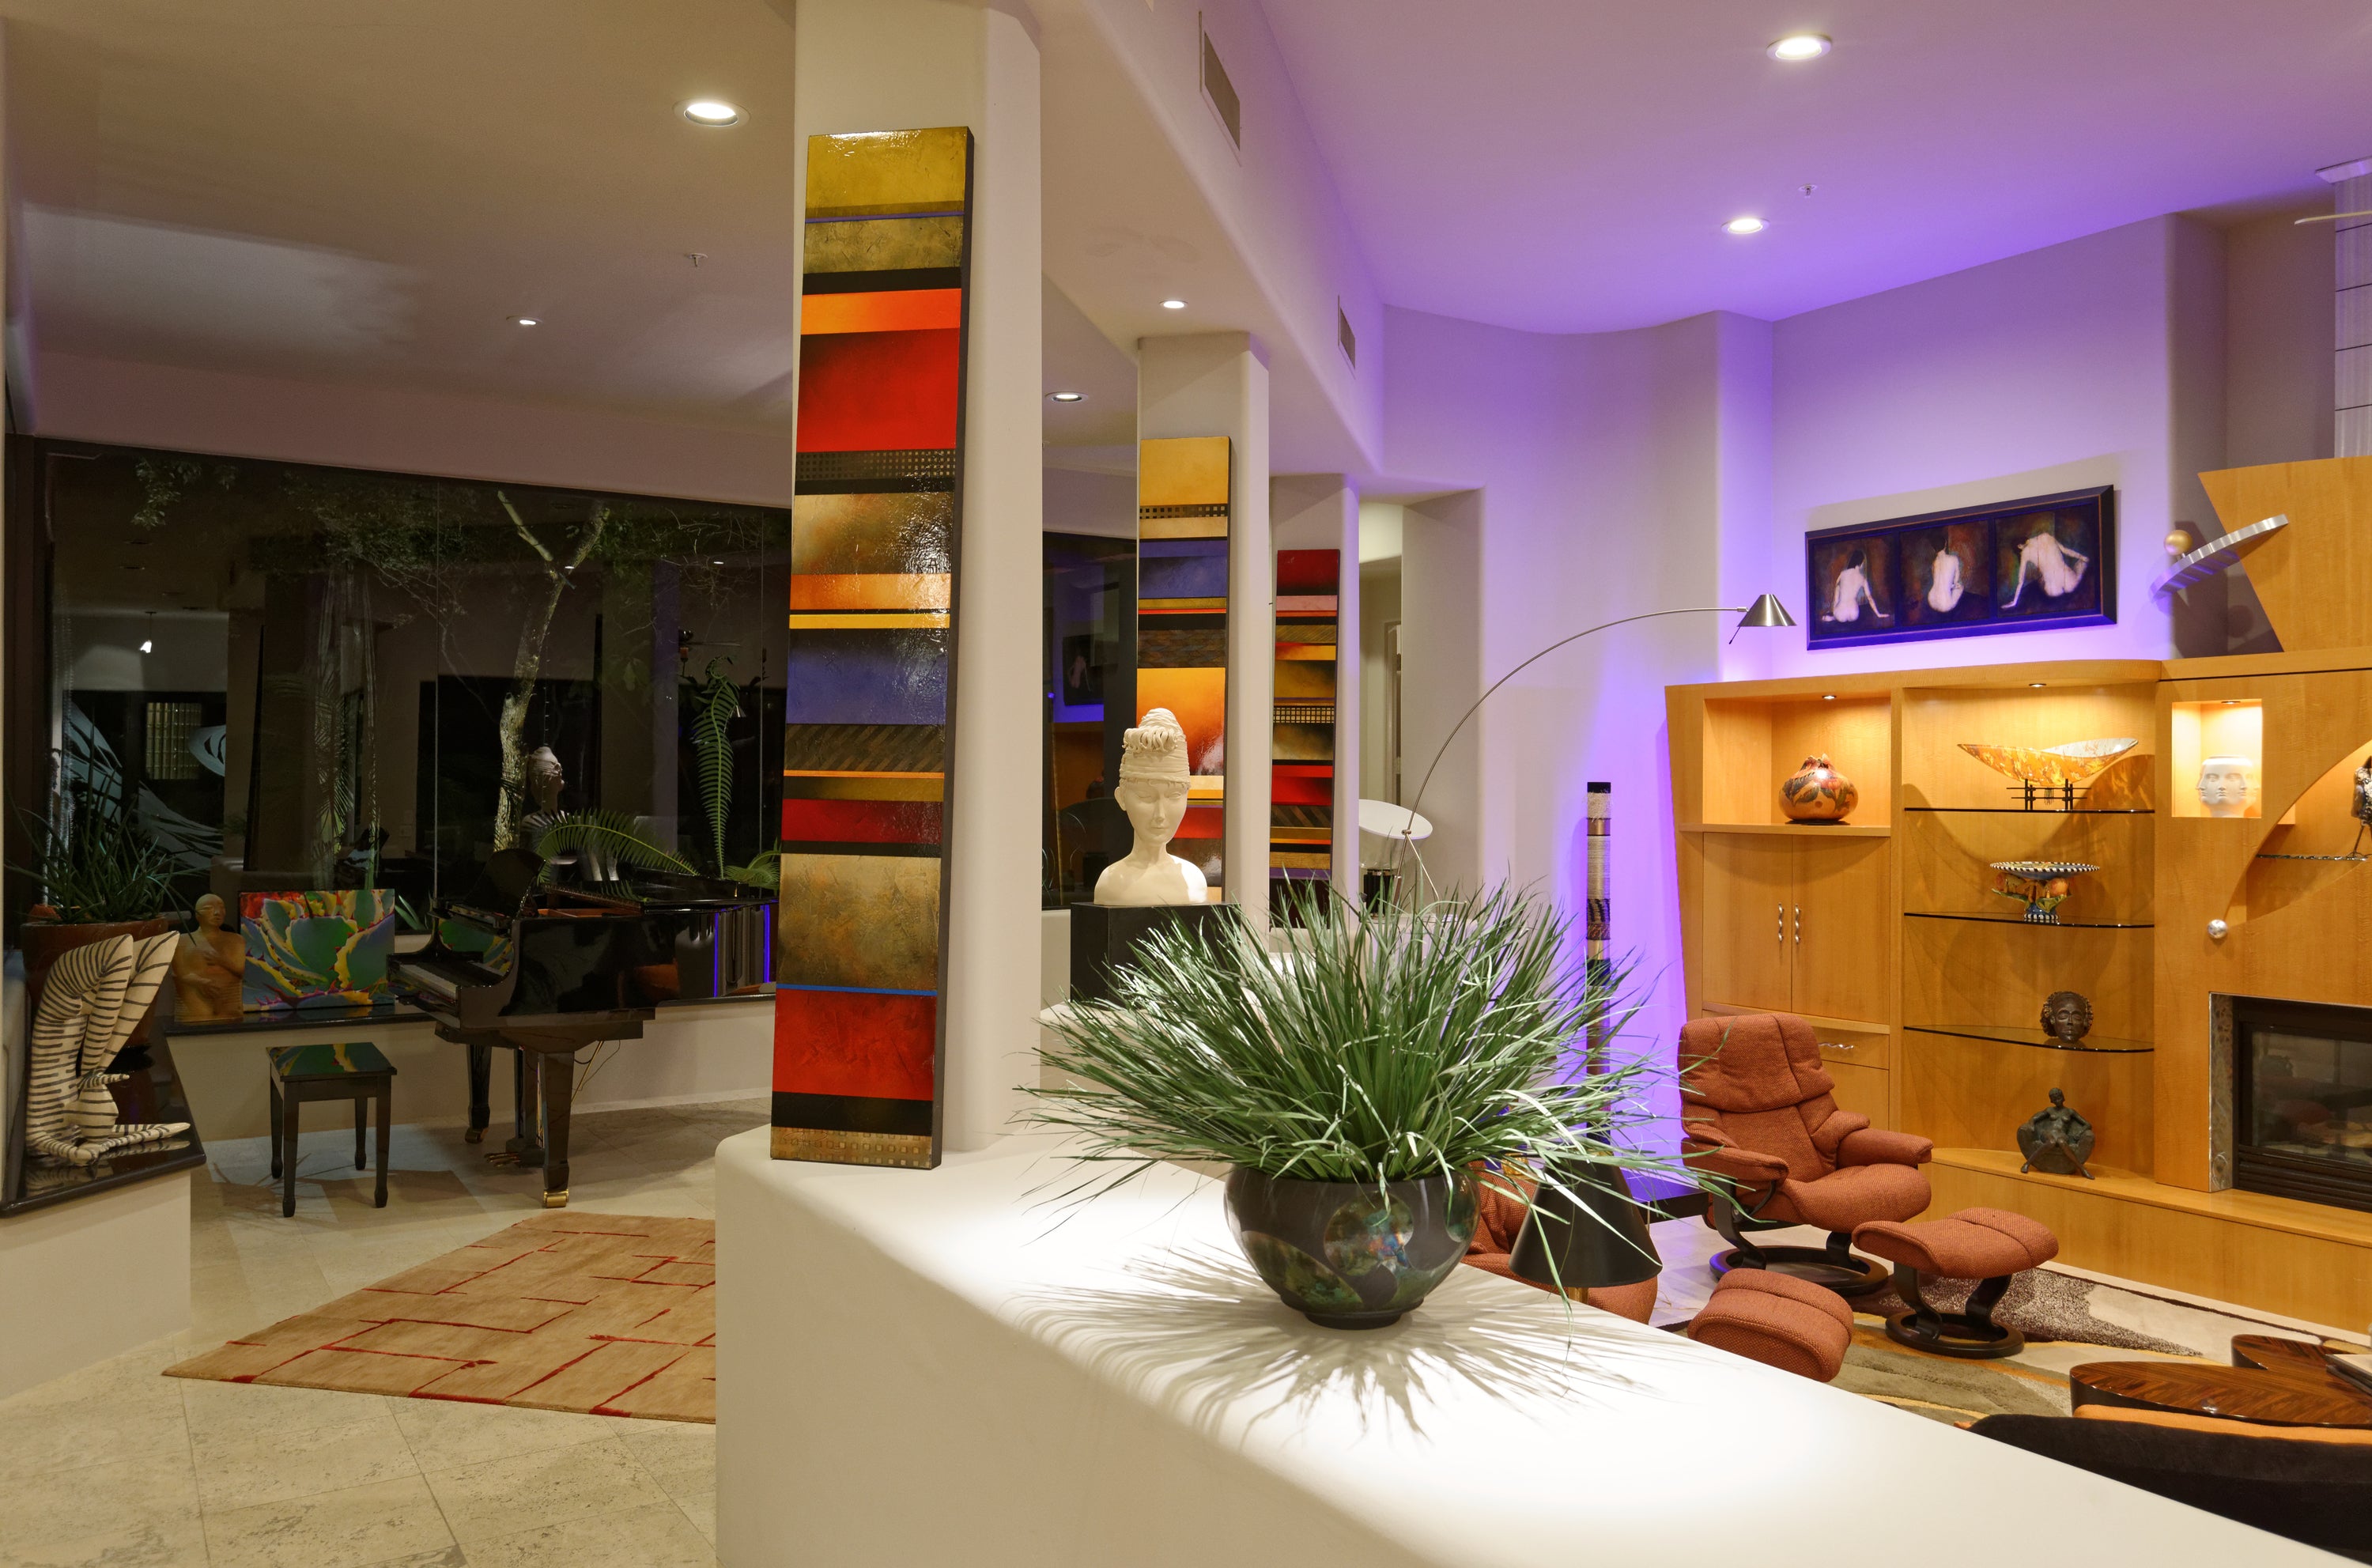 8 Frugal Ways to Get the Look of Trendy Lighting Using Dimmable LEDs Part II